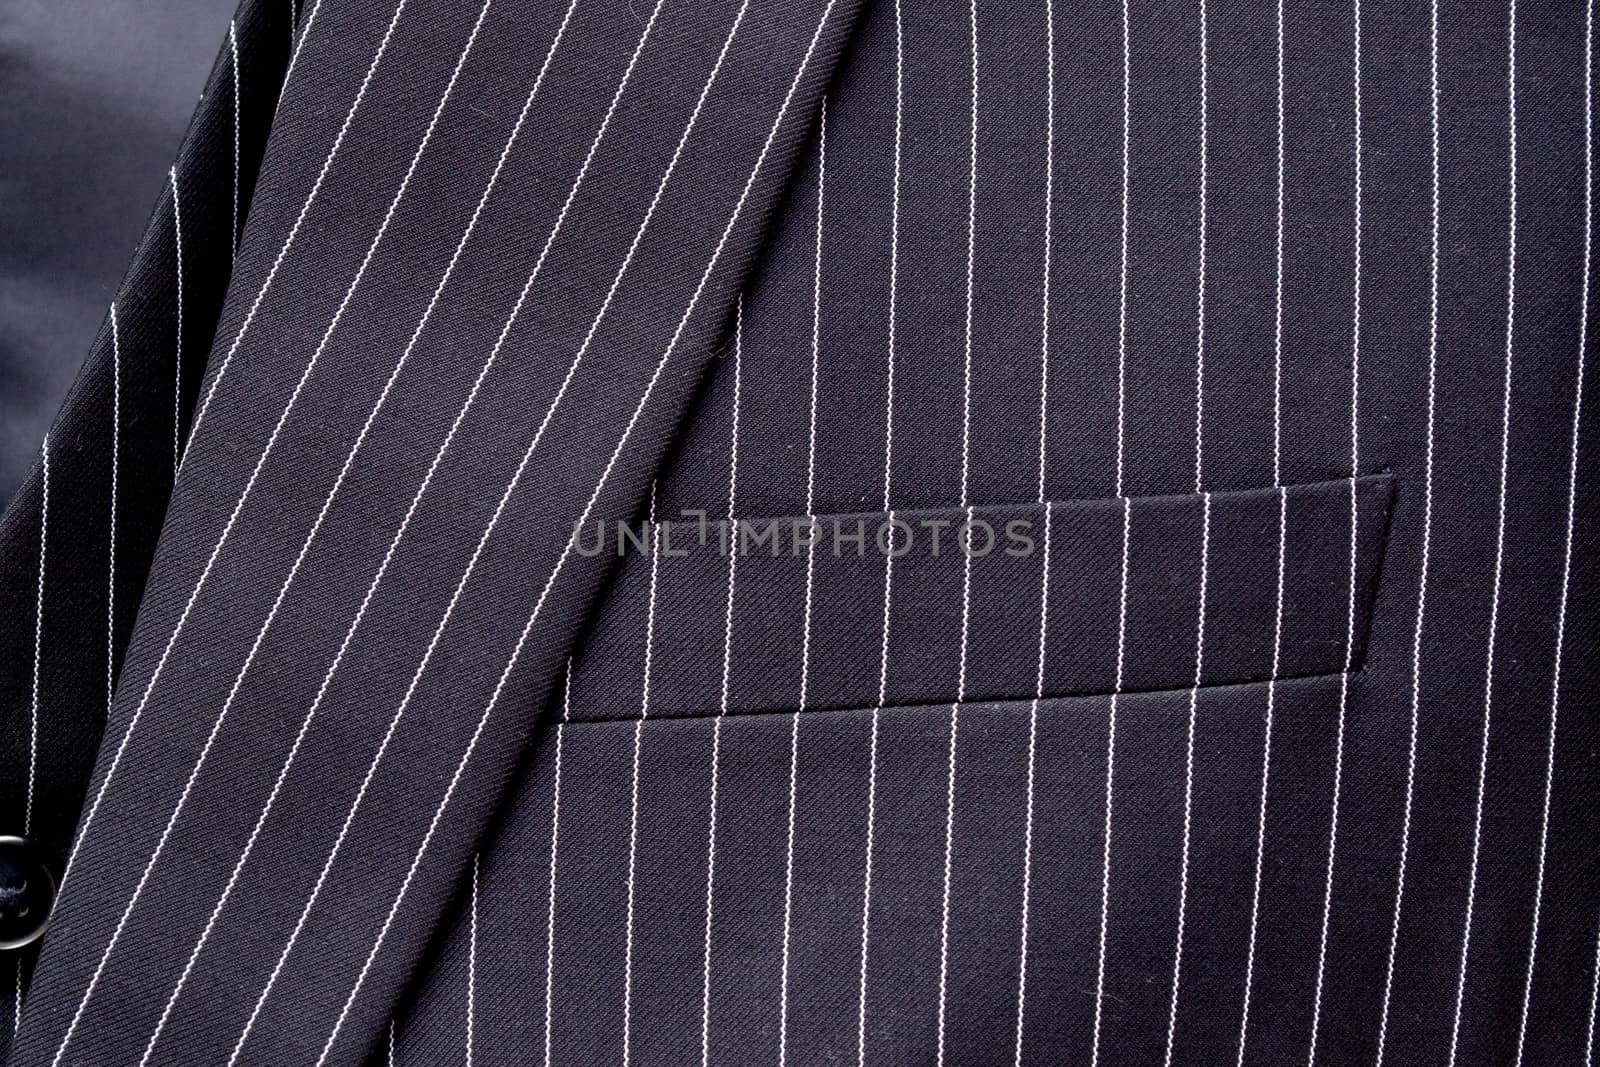 Black and white pinstripe suit detail up close